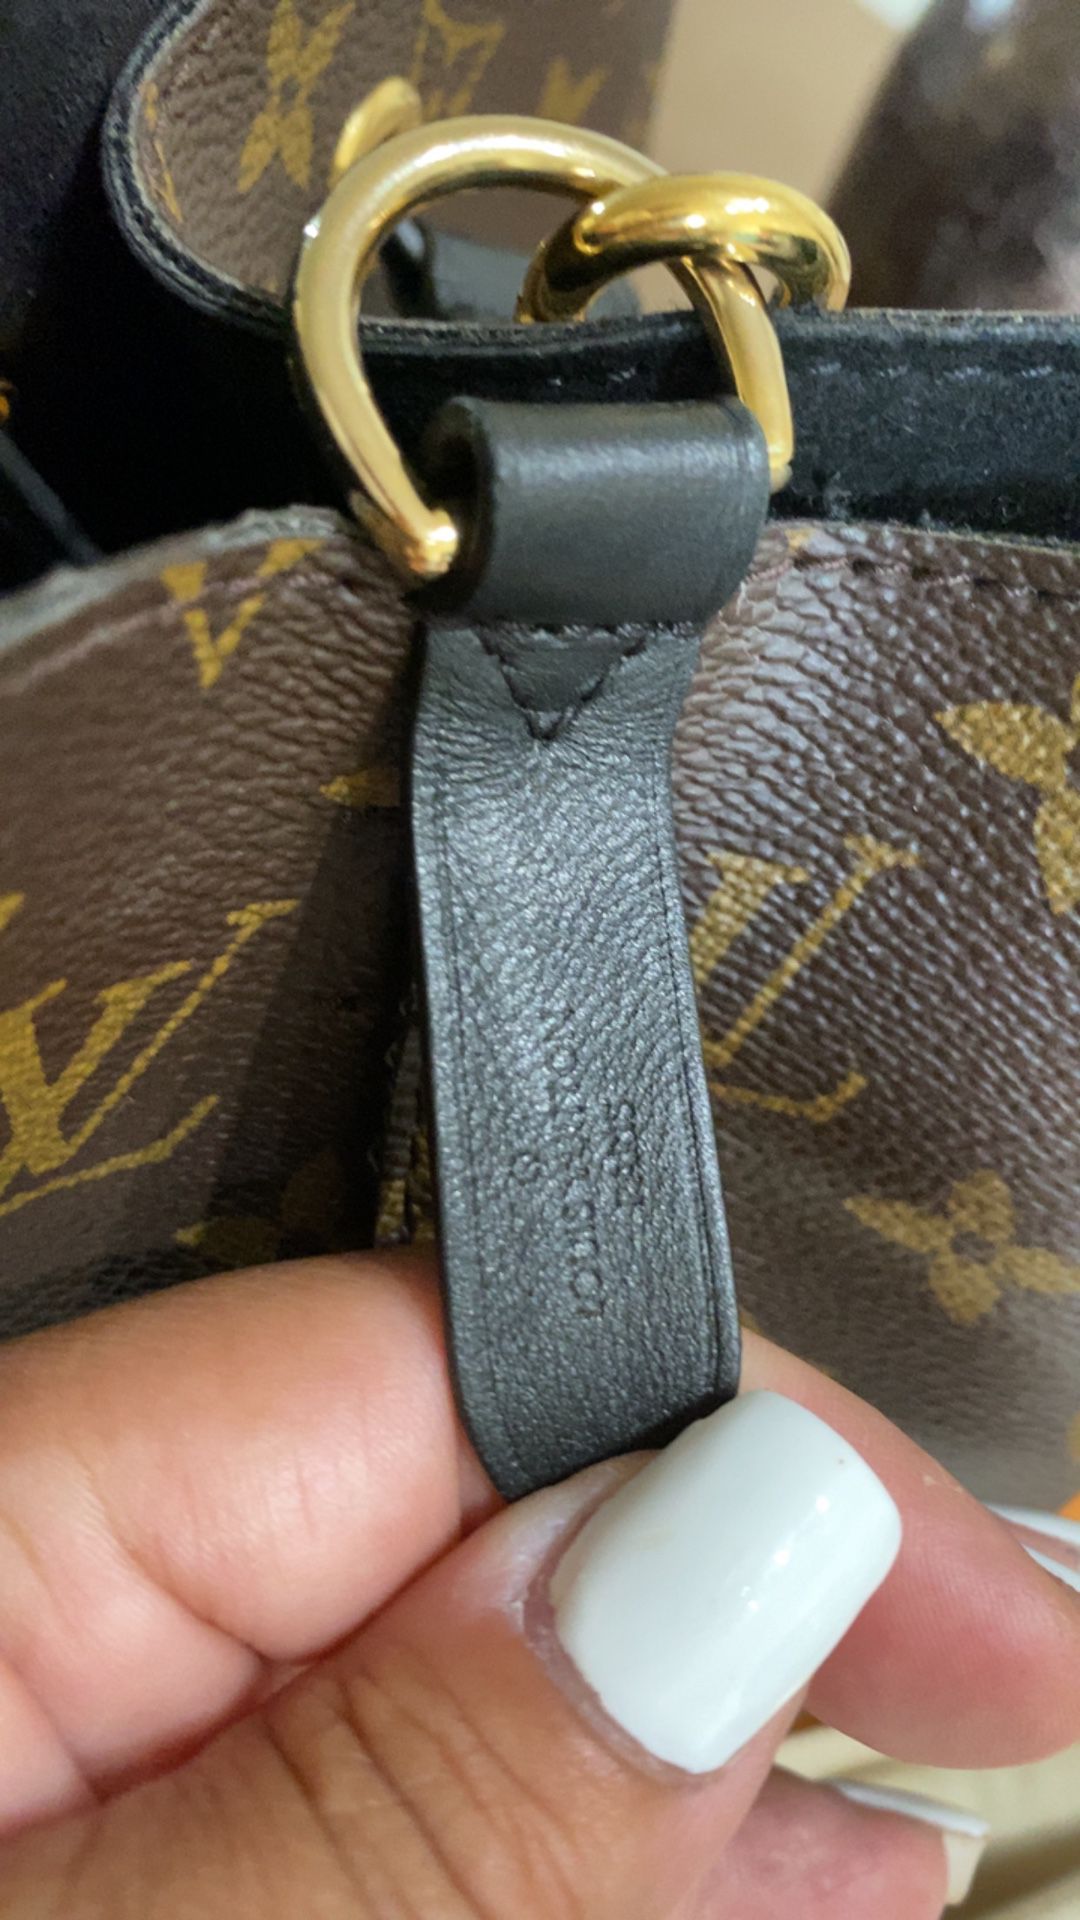 Original LV Bag Or Shoe Box for Sale in Arrowhed Farm, CA - OfferUp